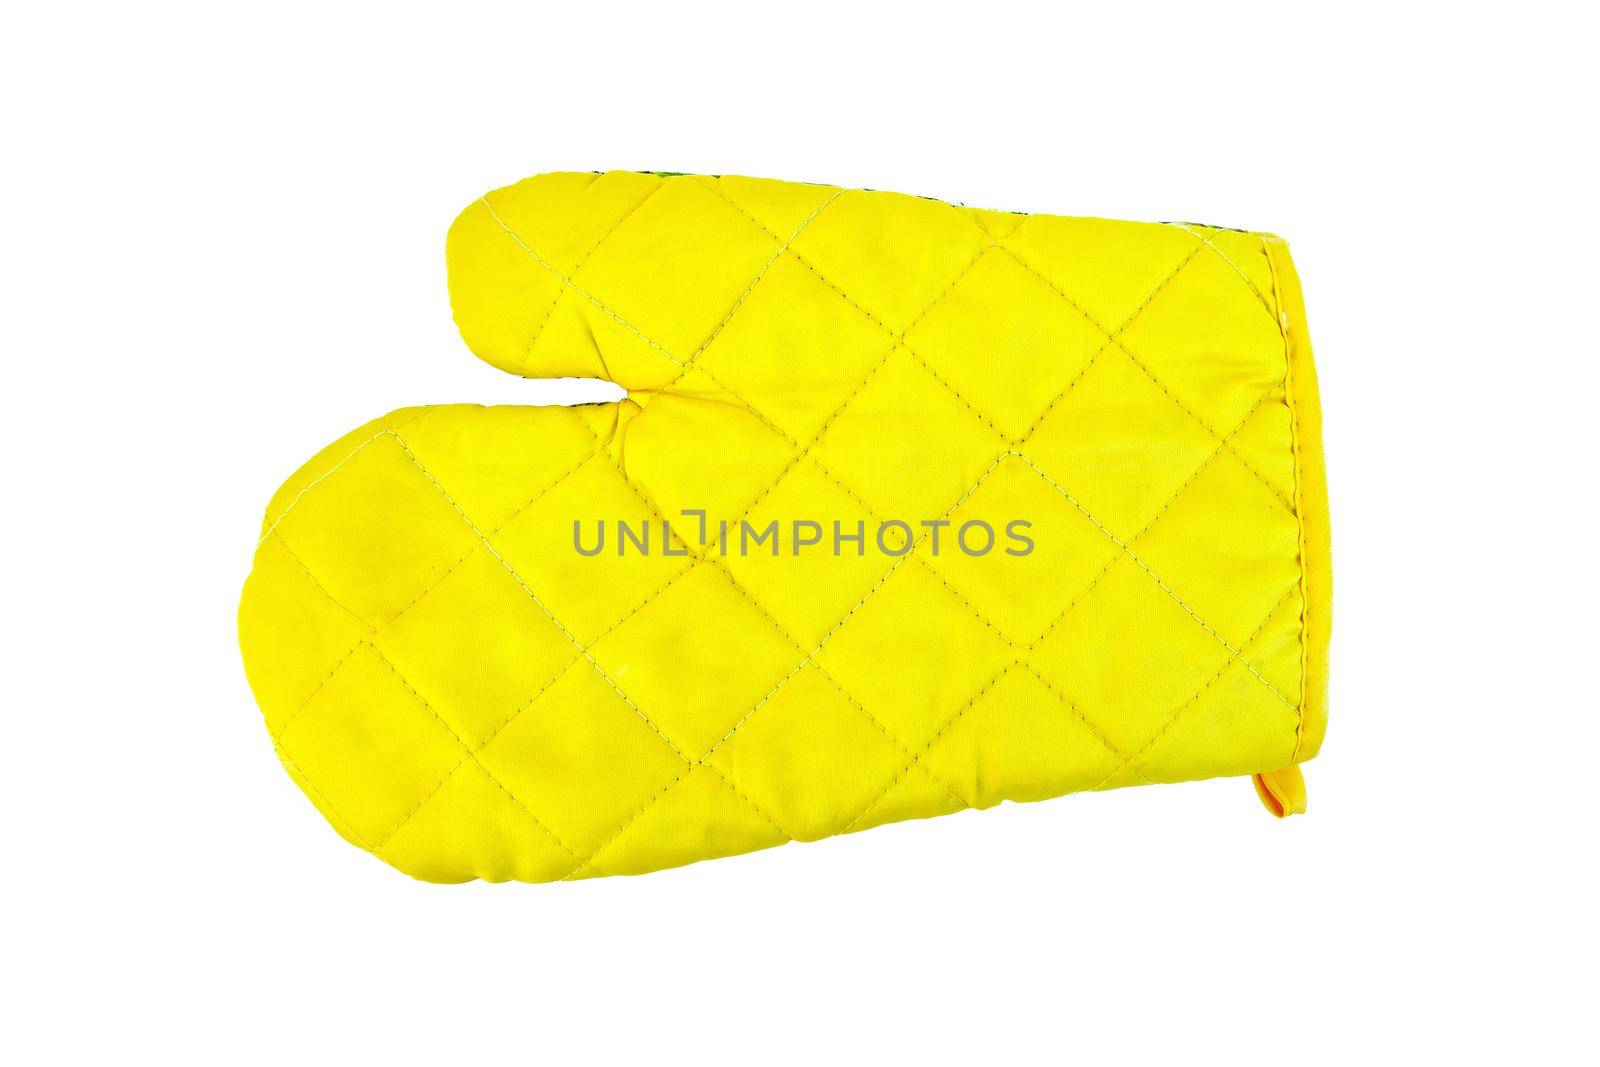 Kitchen yellow potholder in the form of gloves isolated on white background